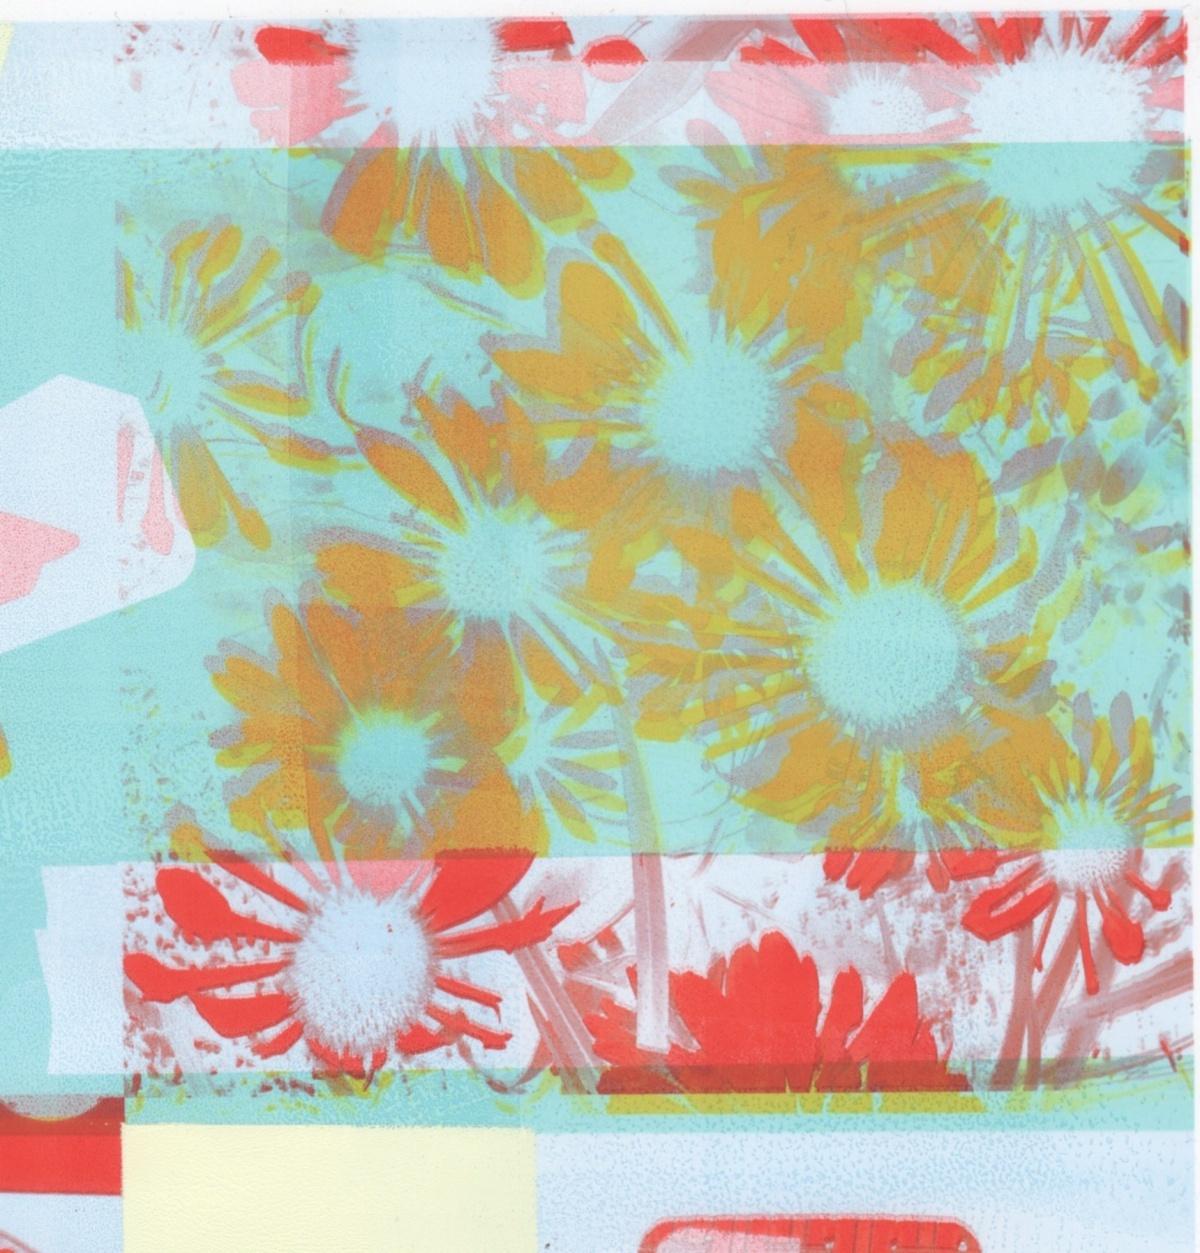 Deconstructed and cropped images of a picnic table, a lawn chair, flowers, and a pineapple upside cake are represented in Patty deGrandpre’s 12 x 12 inch contemporary mixed media monoprint titled “Picnic”. Hues of vivid red, yellow, blue, and black